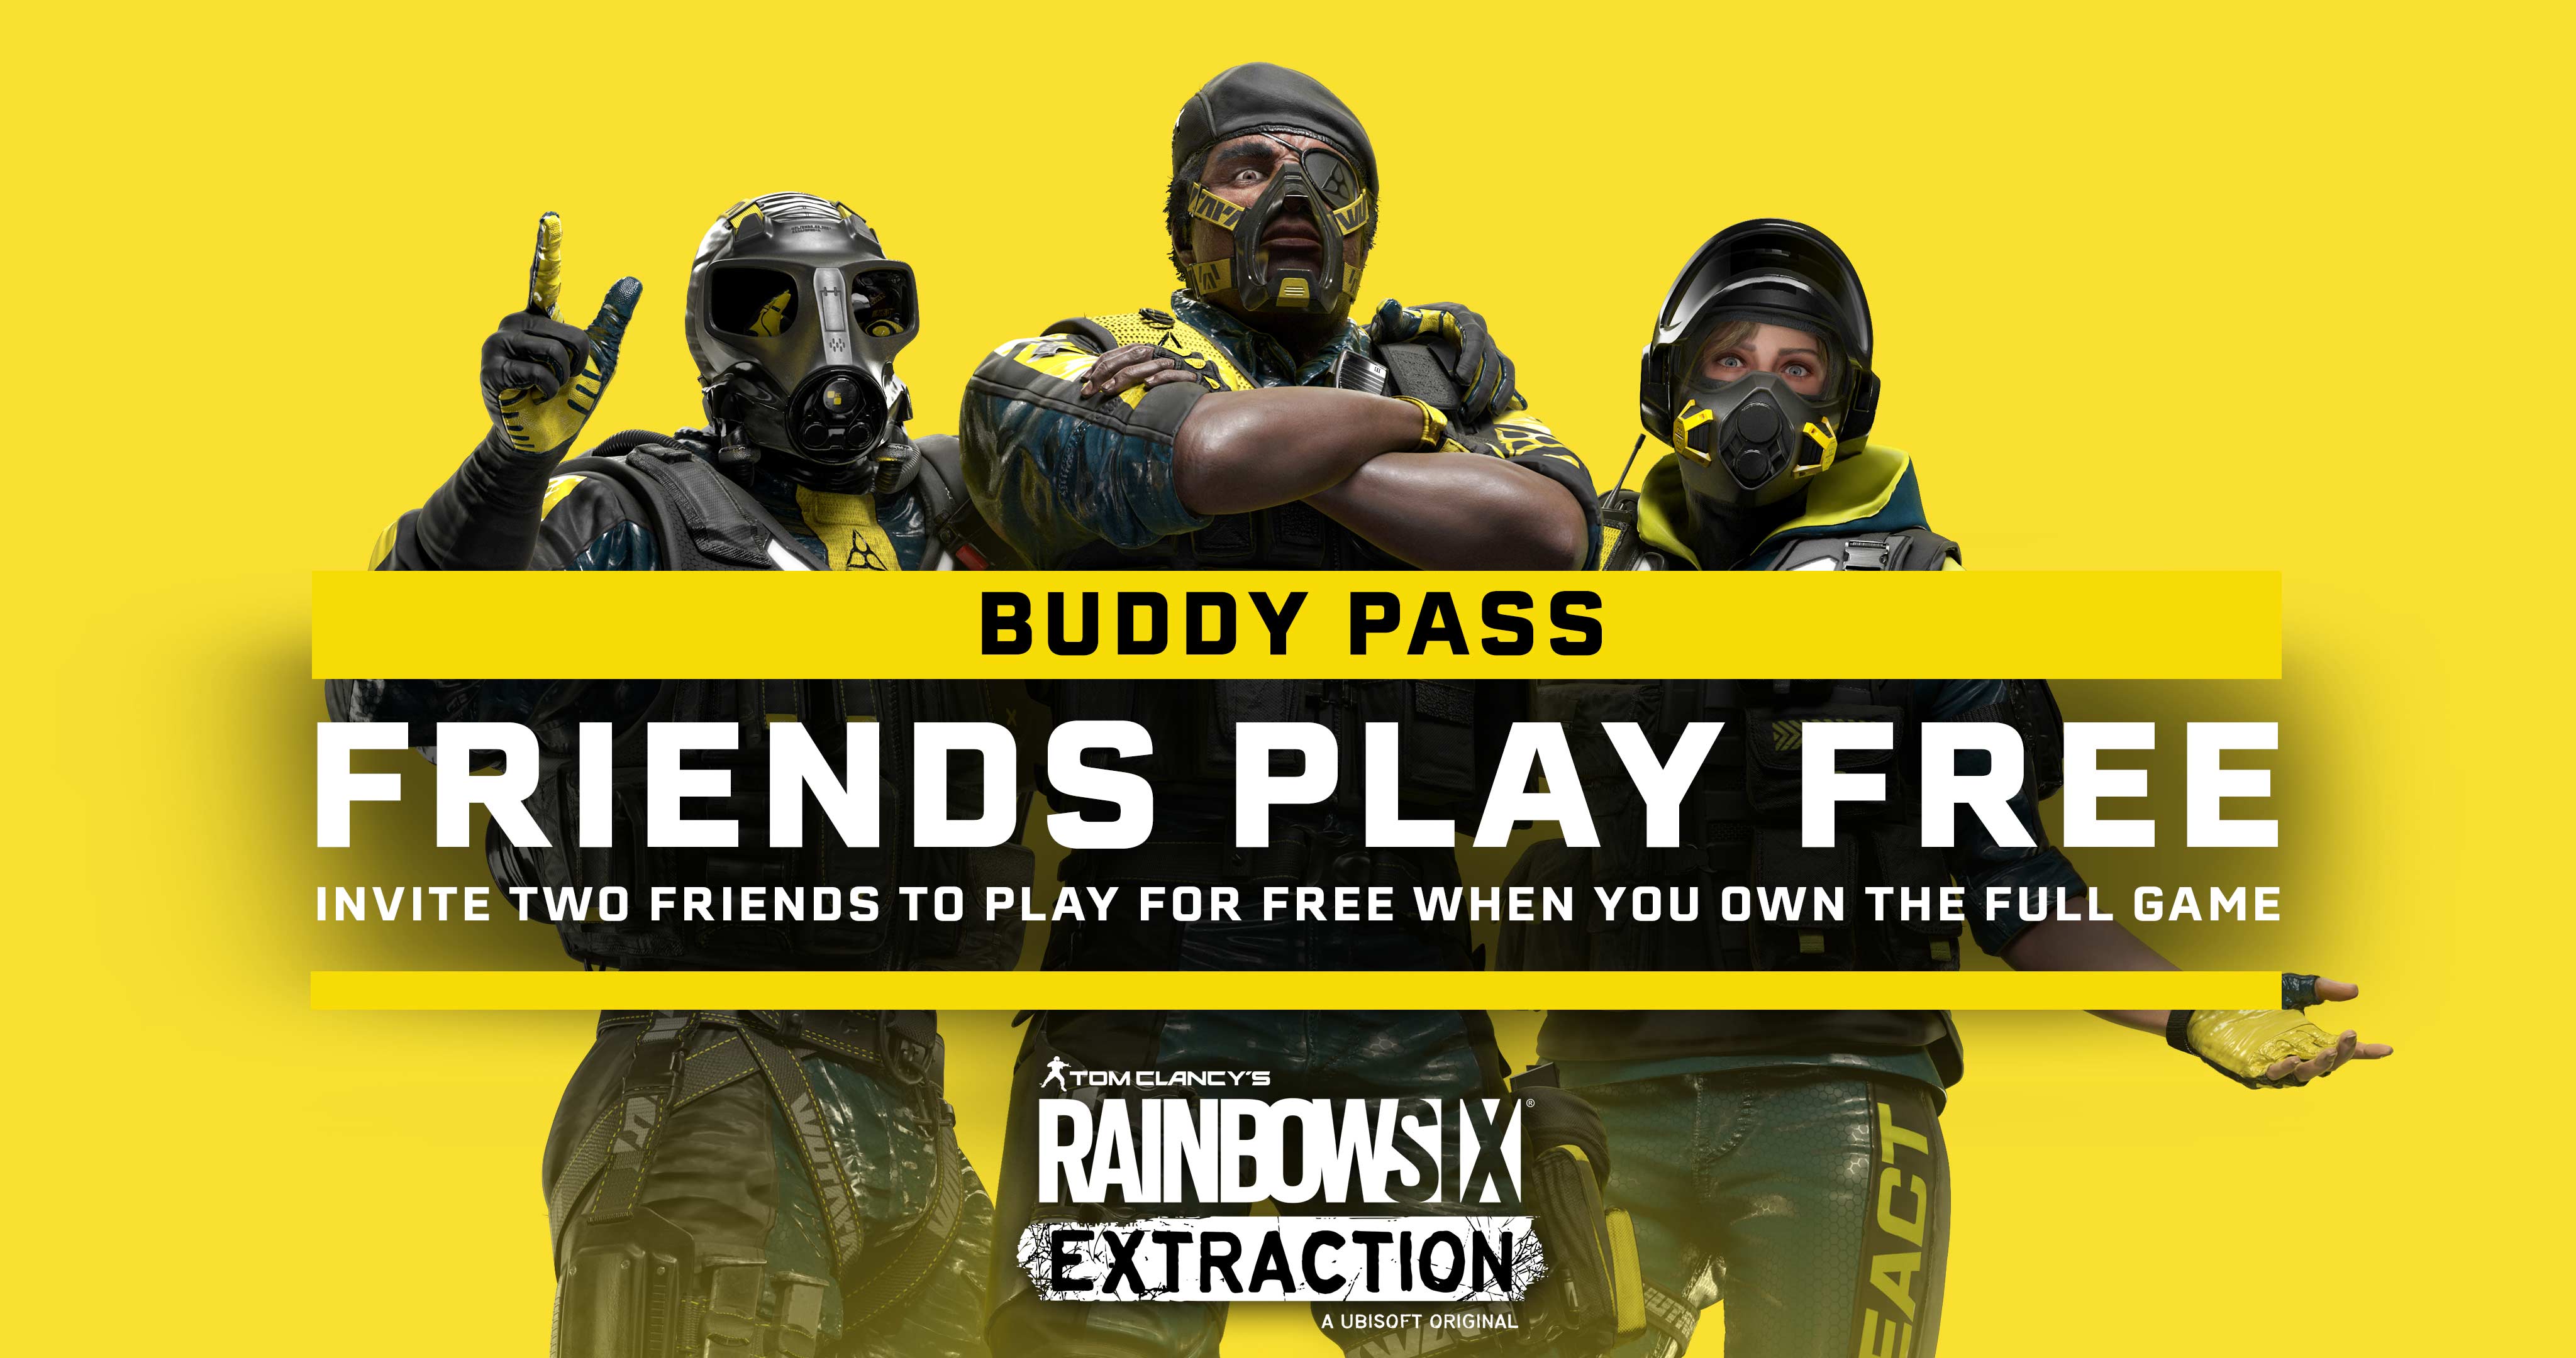 The Buddy Pass is a feature included with every full game copy of Rainbow Six Extraction, which allows you to enjoy 14 days of play with two of your friends on any platform, even if they don't own the game.